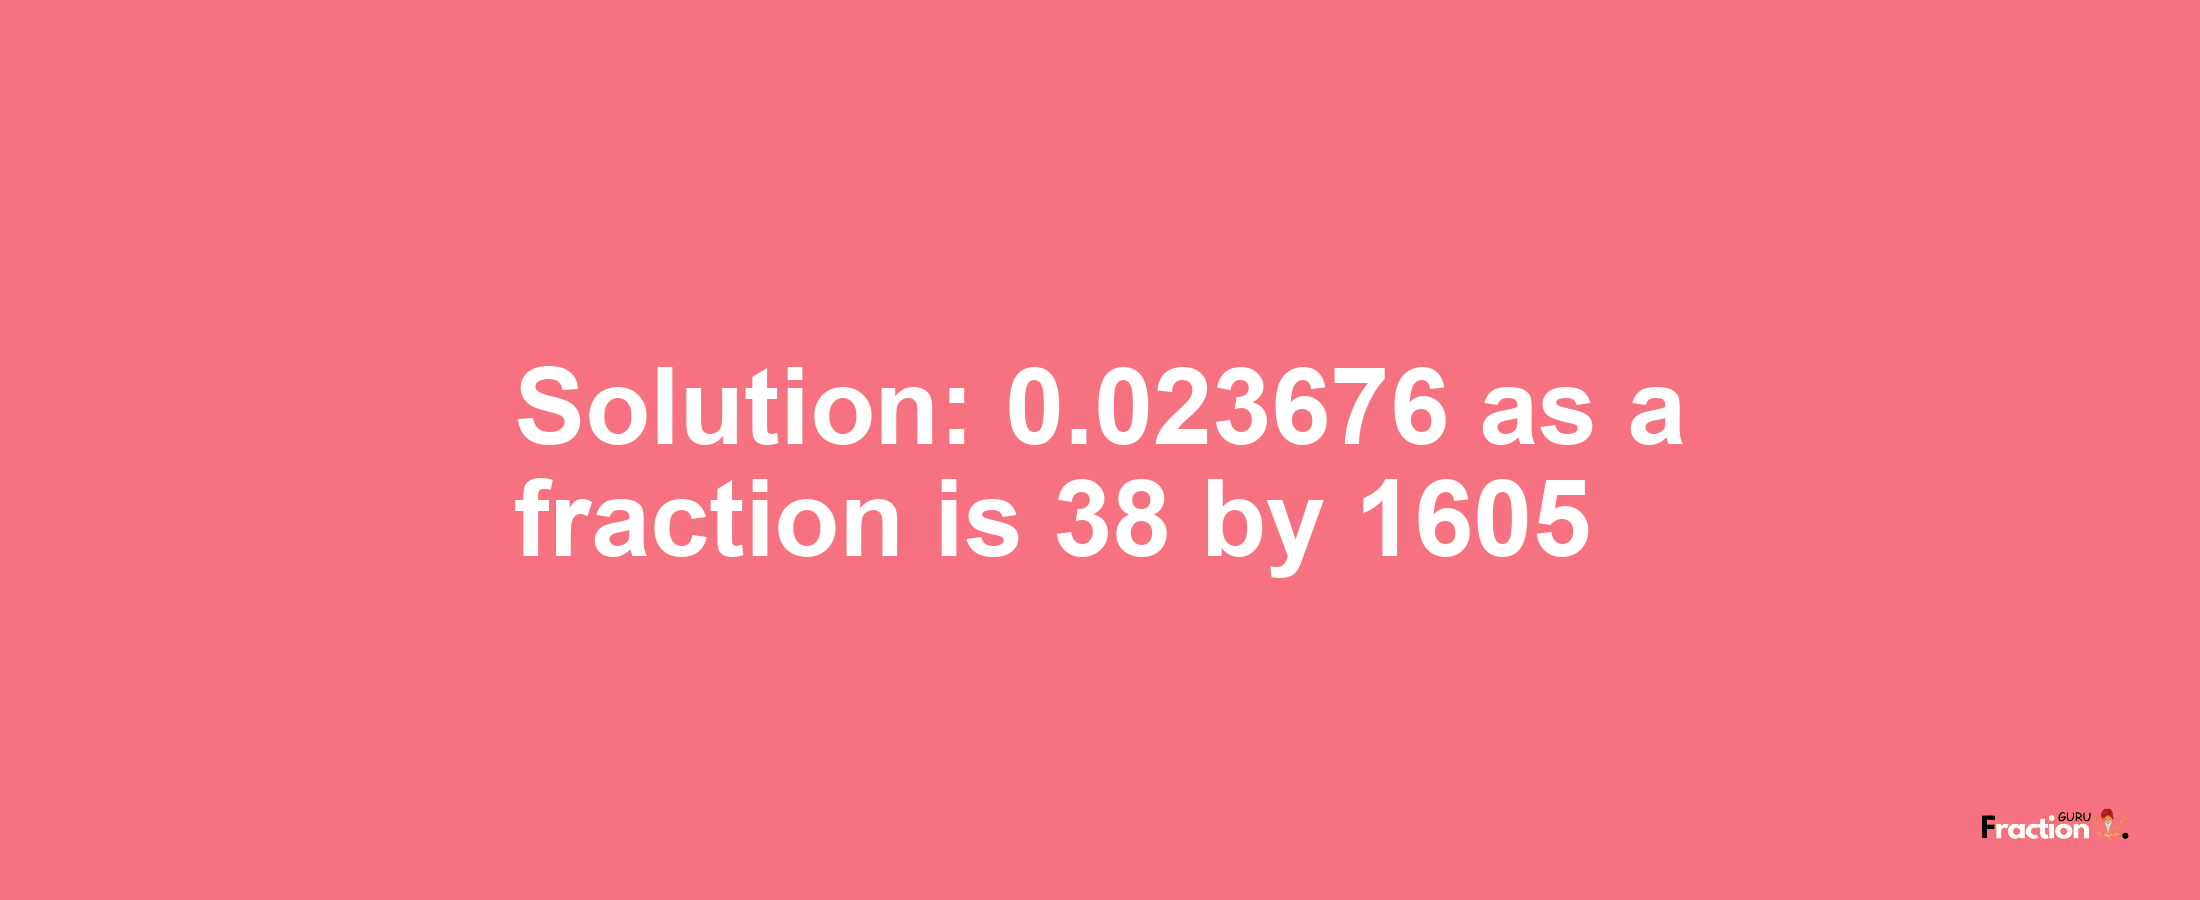 Solution:0.023676 as a fraction is 38/1605